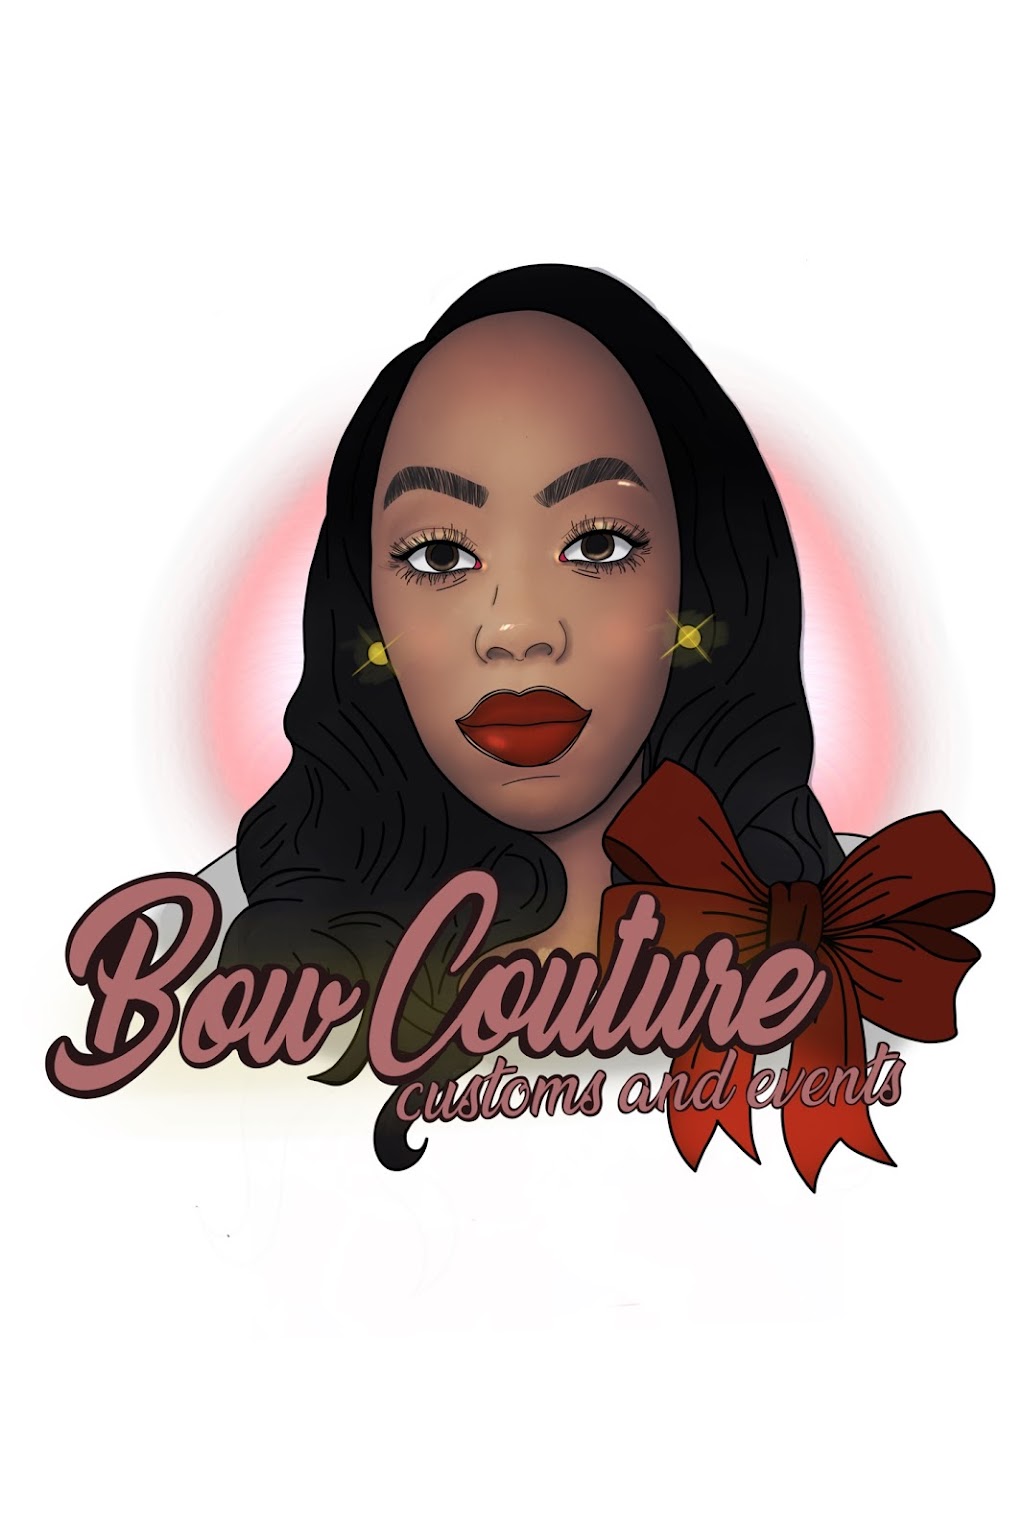 Bow Couture Customs & Events | 1000 Renfro Ave Unit 3, Opelika, AL 36801 | Phone: (334) 718-3659